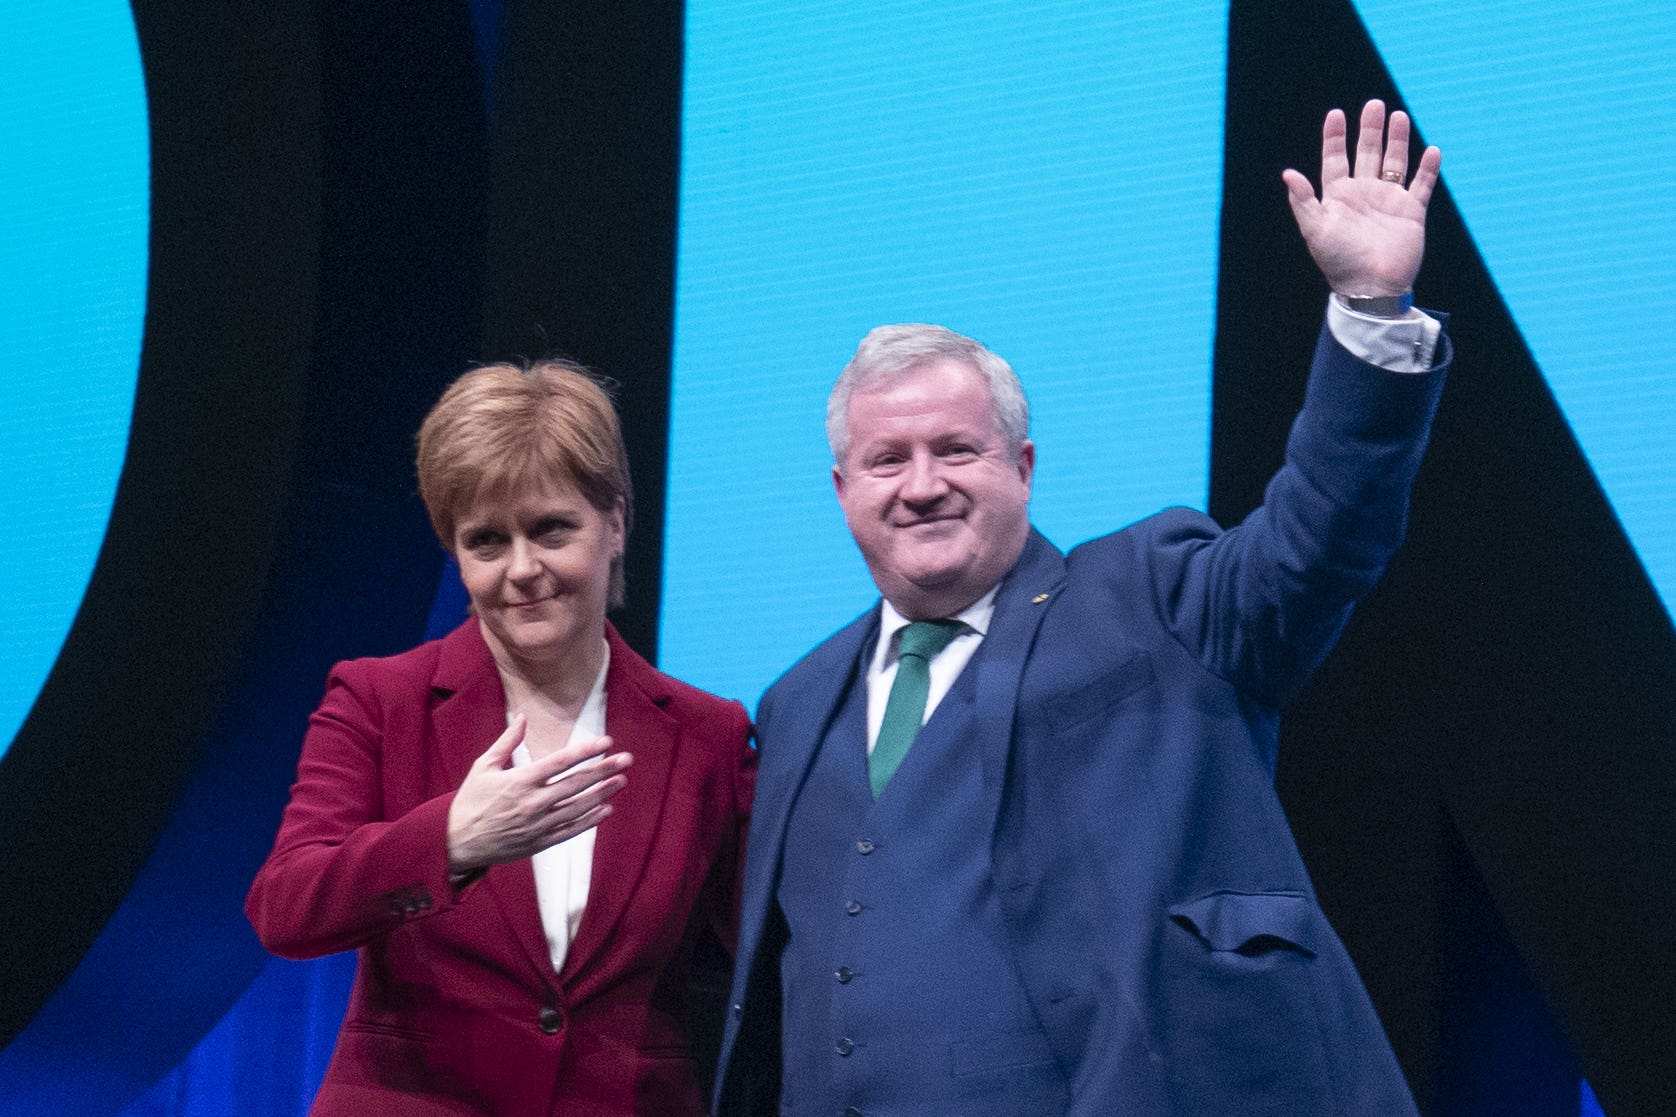 The First Minister paid tribute to her Westminster leader as he announced he would step down (Jane Barlow/PA)